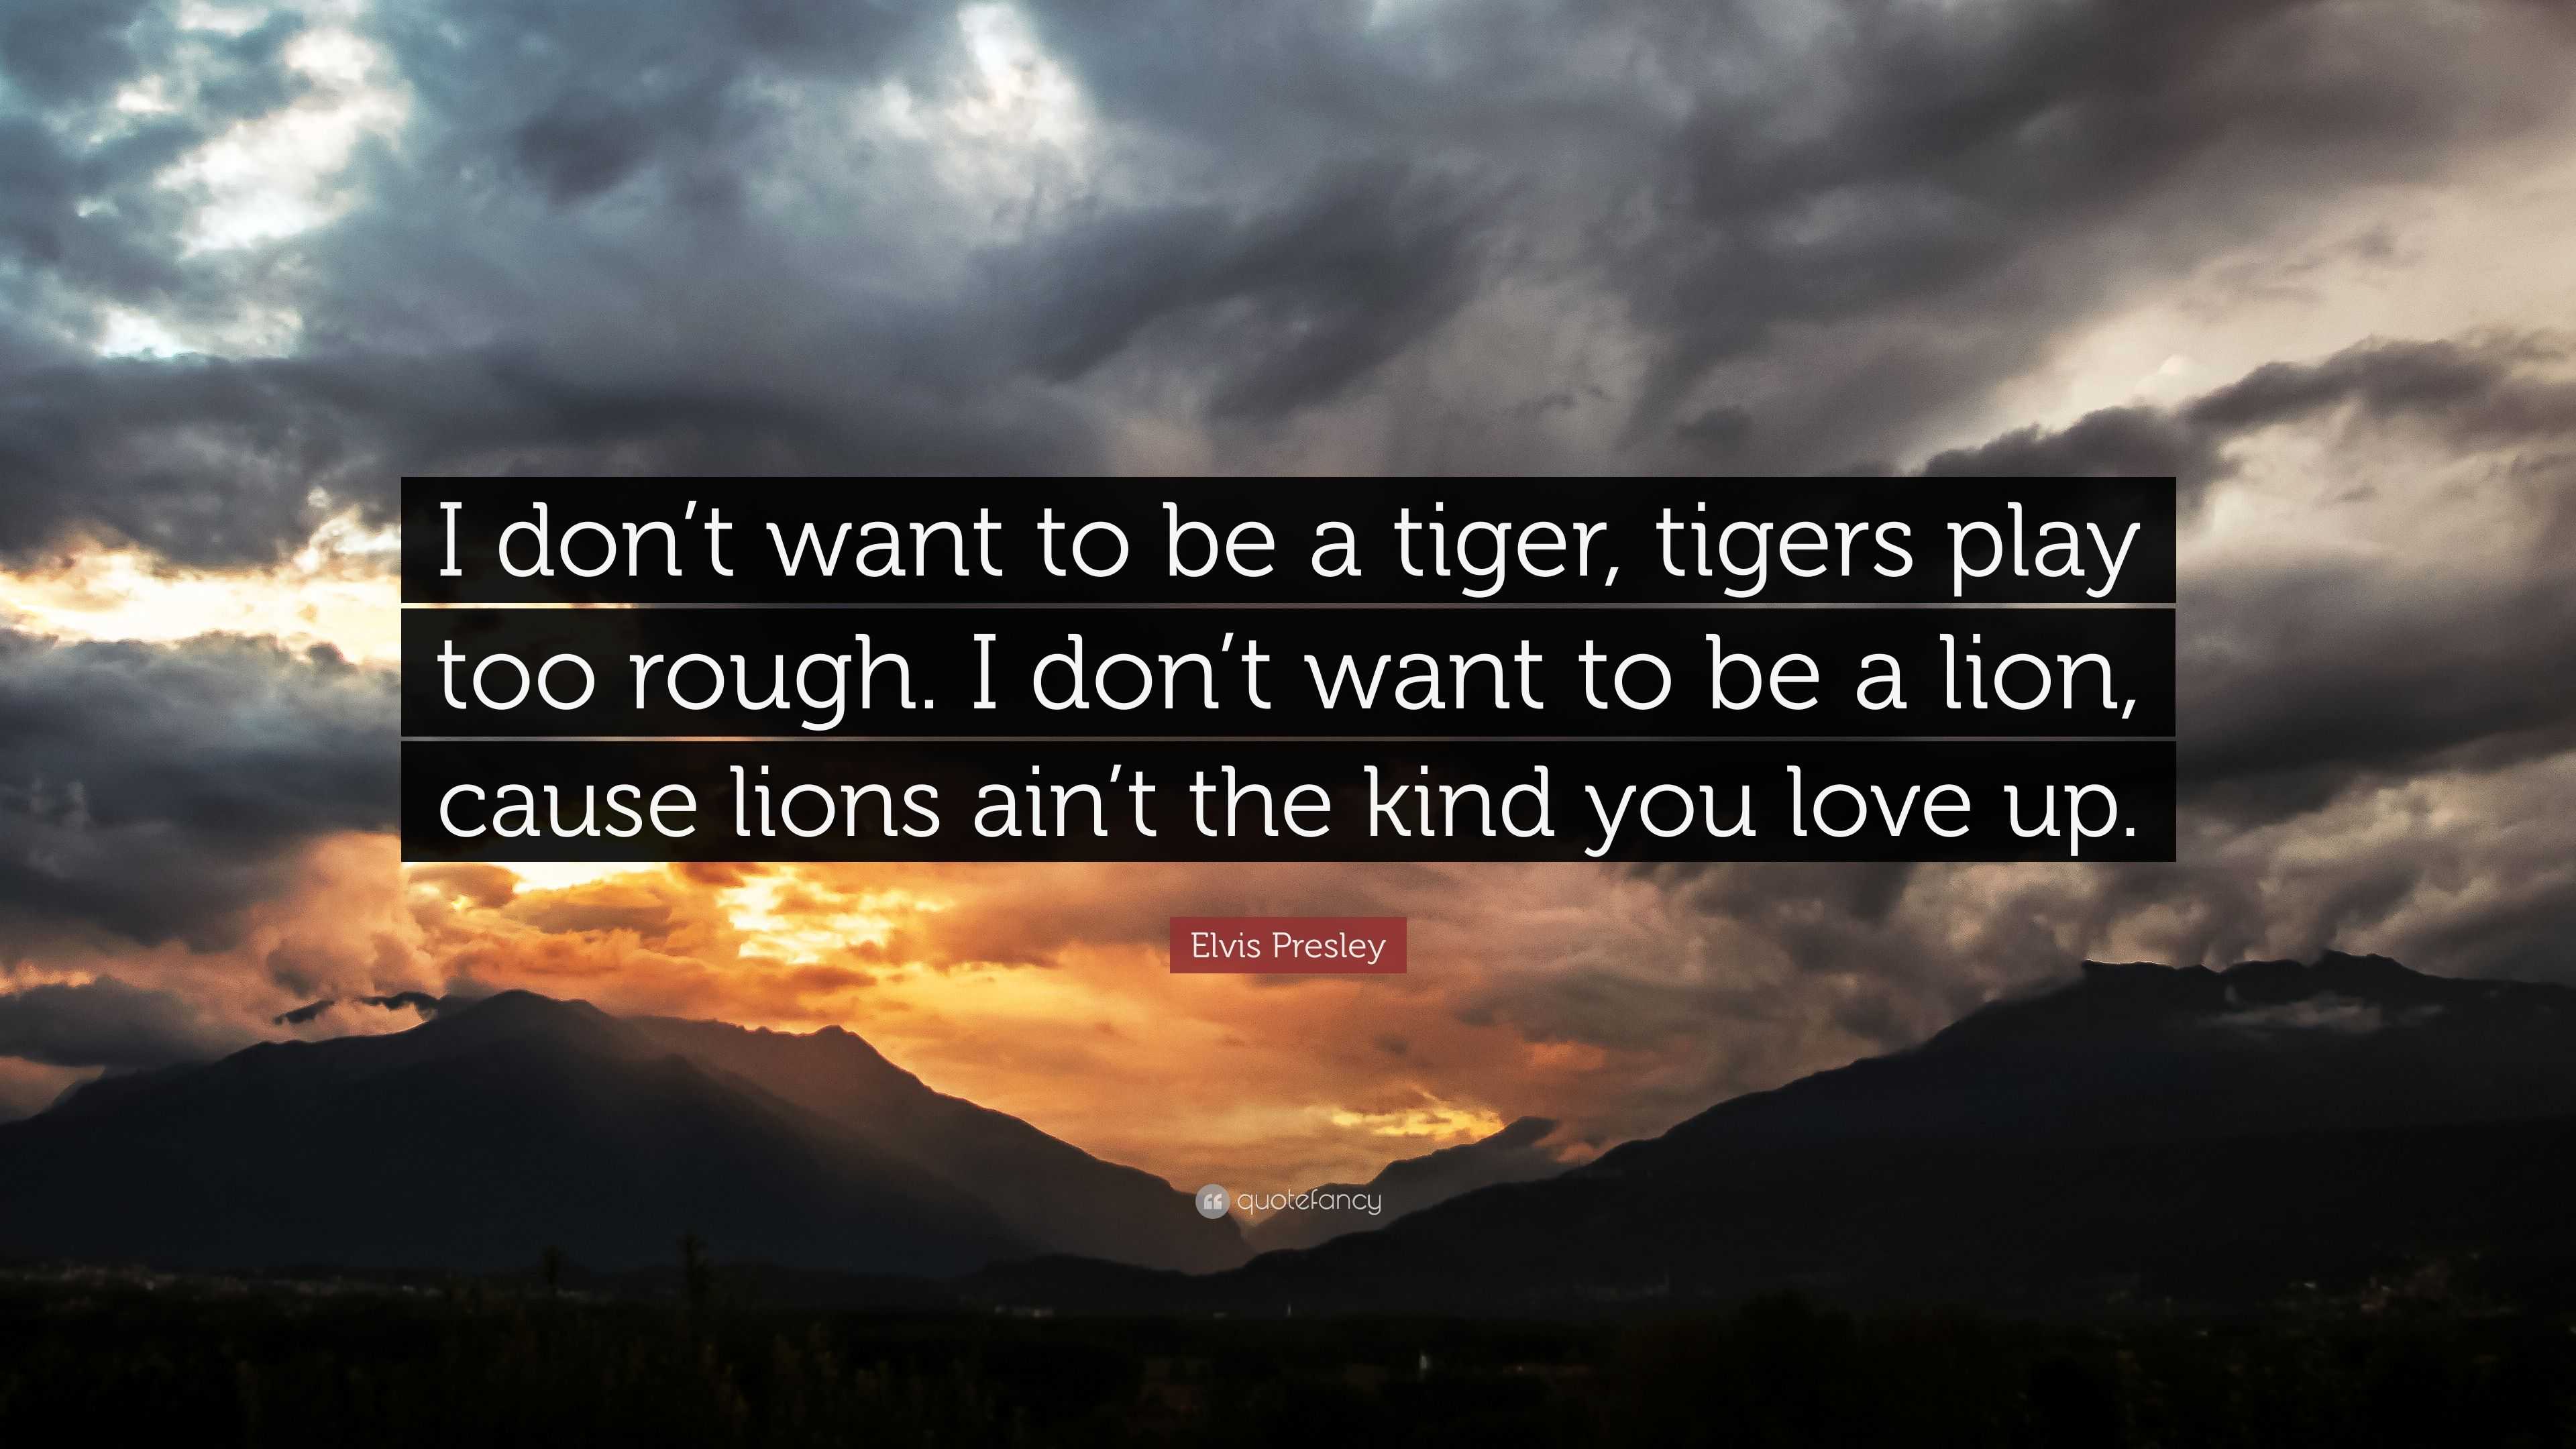 Elvis Presley Quote “I don t want to be a tiger tigers